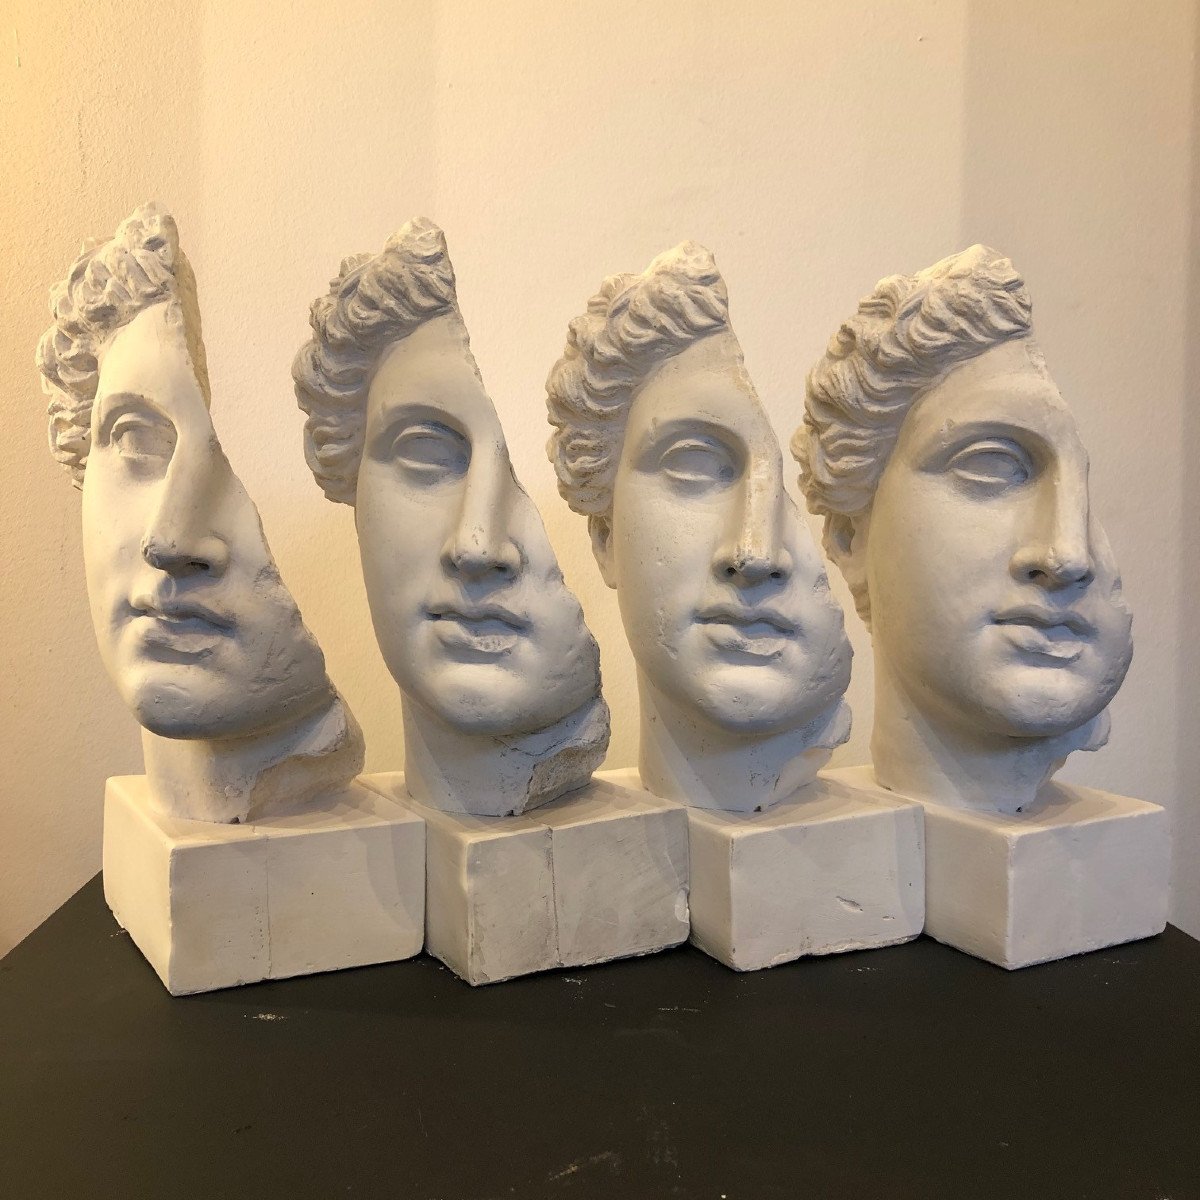 Fragments Of Head Of Alexander The Great, Plaster Sculptures In Four (4) Copies